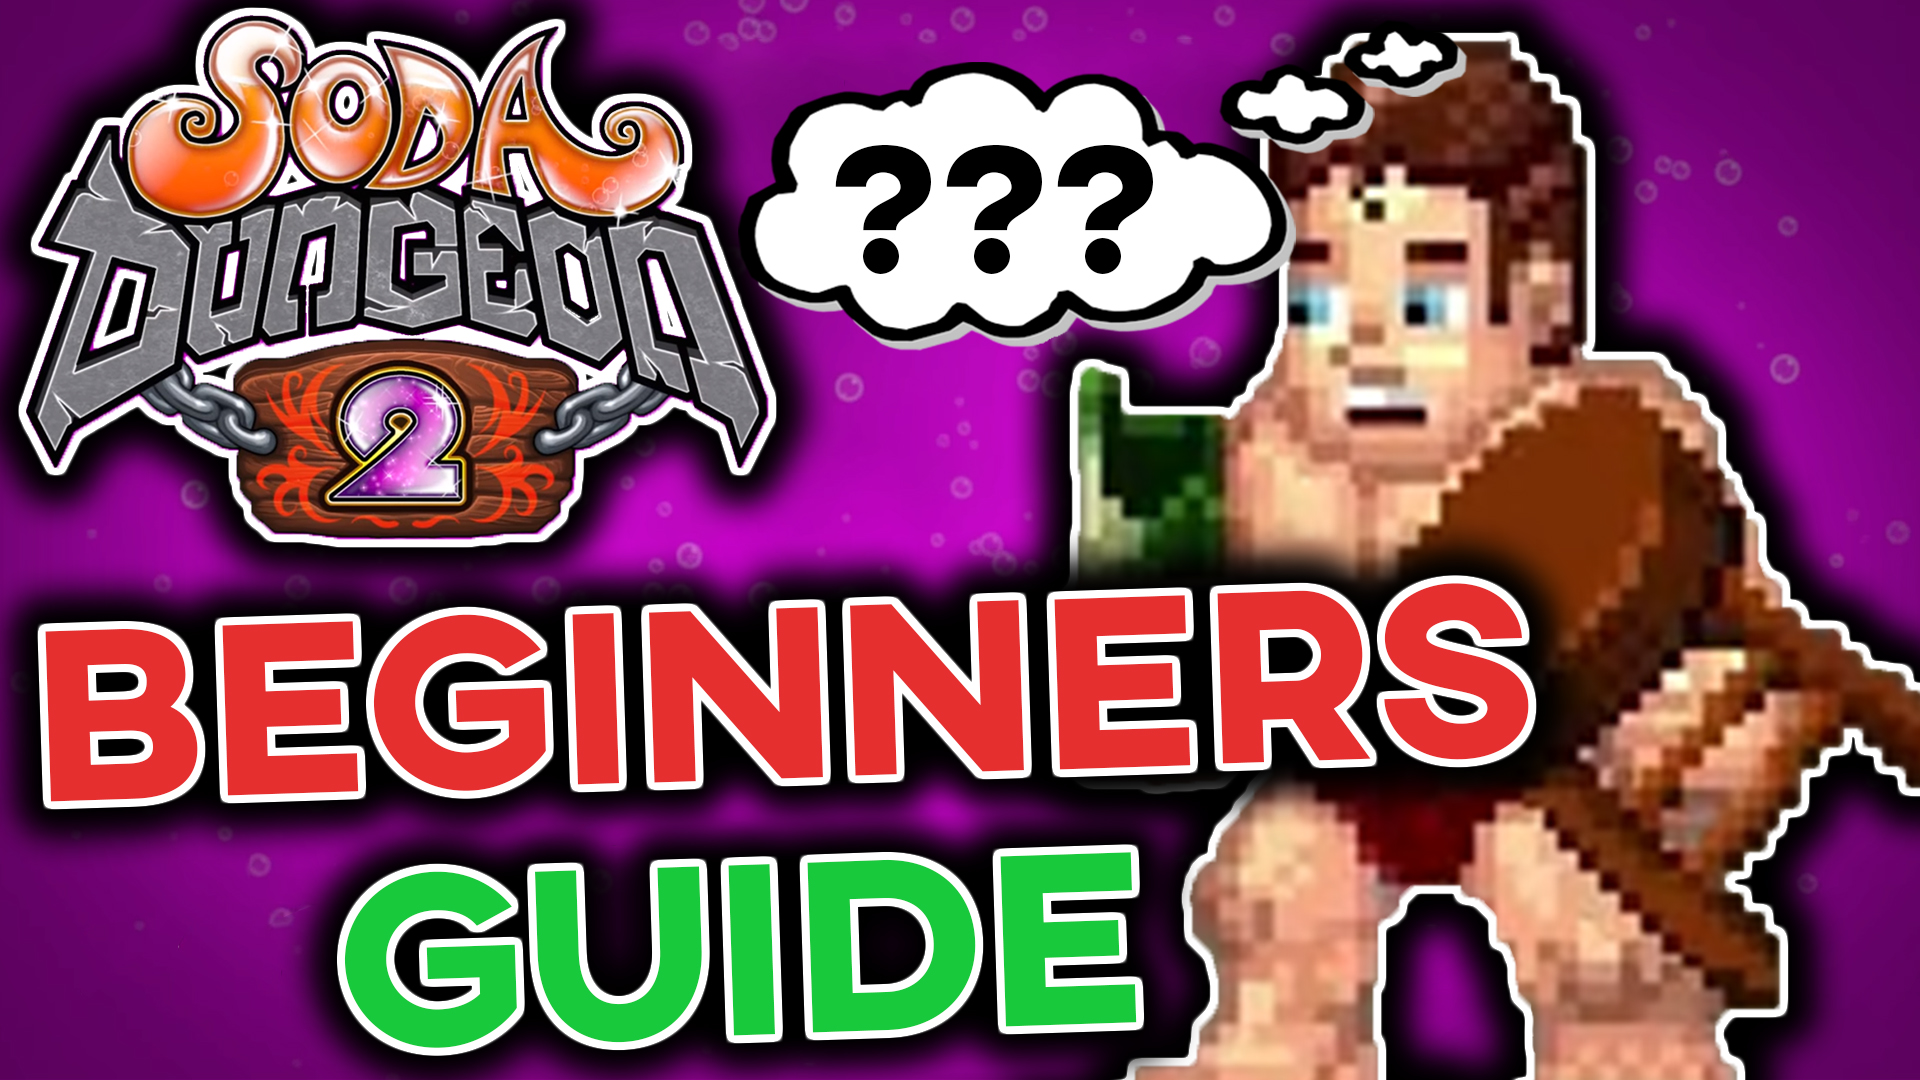 Soda Dungeon 2 Beginner's Guide for Soda Dungeon 2